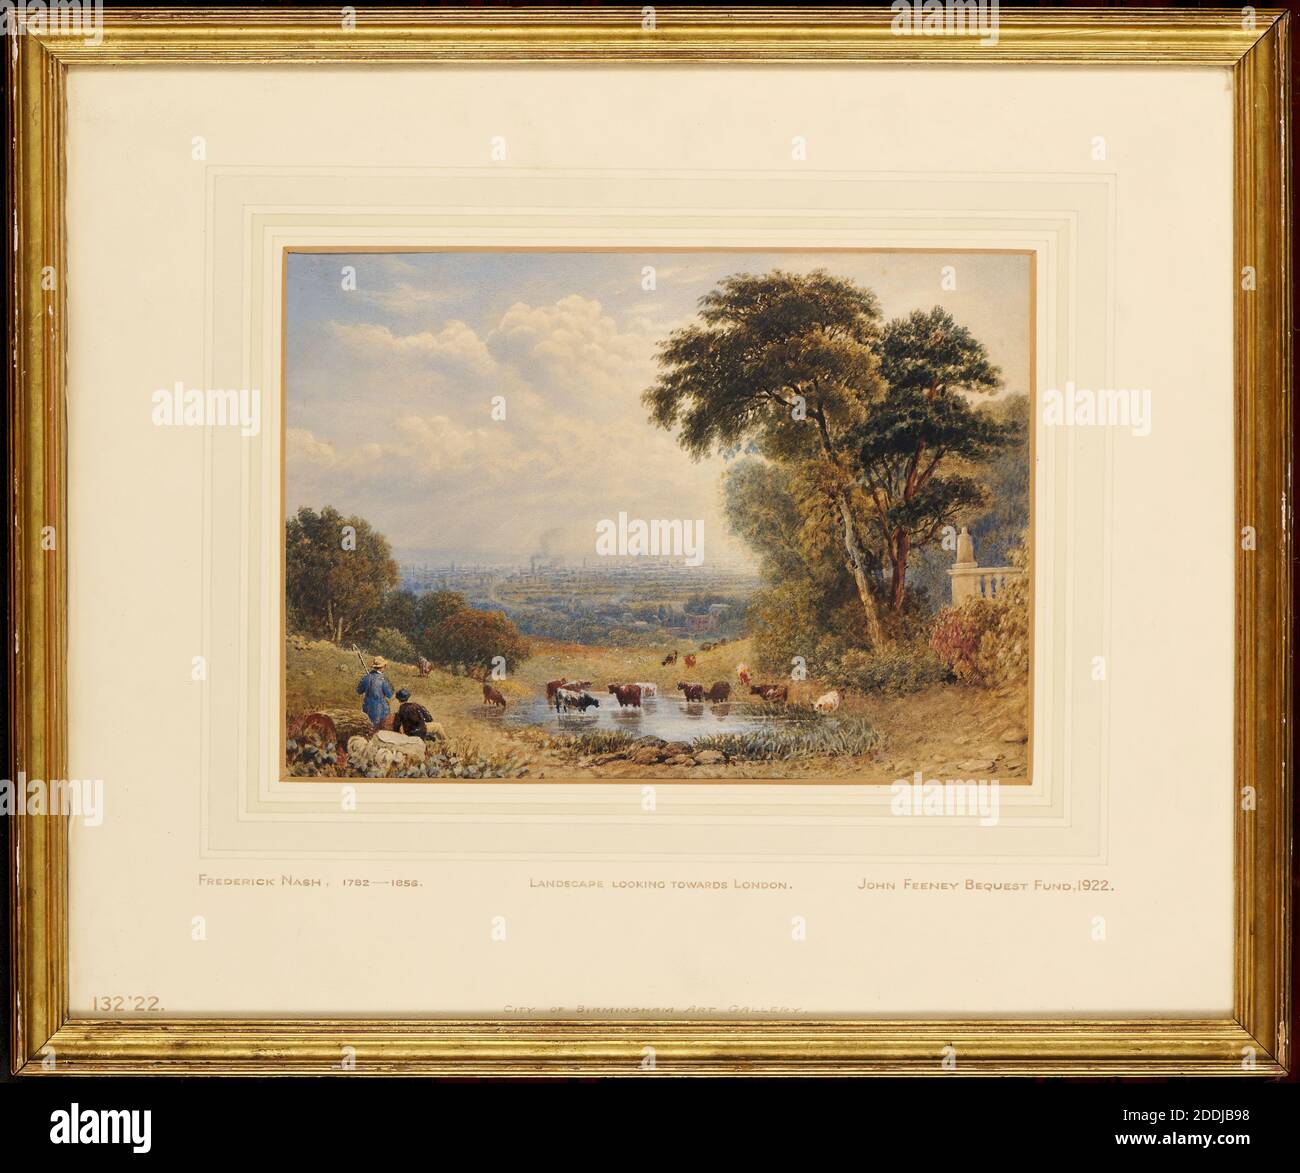 Landscape Looking Towards London, 1800-50 Frederick Nash, Landscape, 19th Century, Drawing, Watercolour, Topographical Views, Frame, Animal, Cow, London, Nature, Pond, Animal, Works on Paper Stock Photo